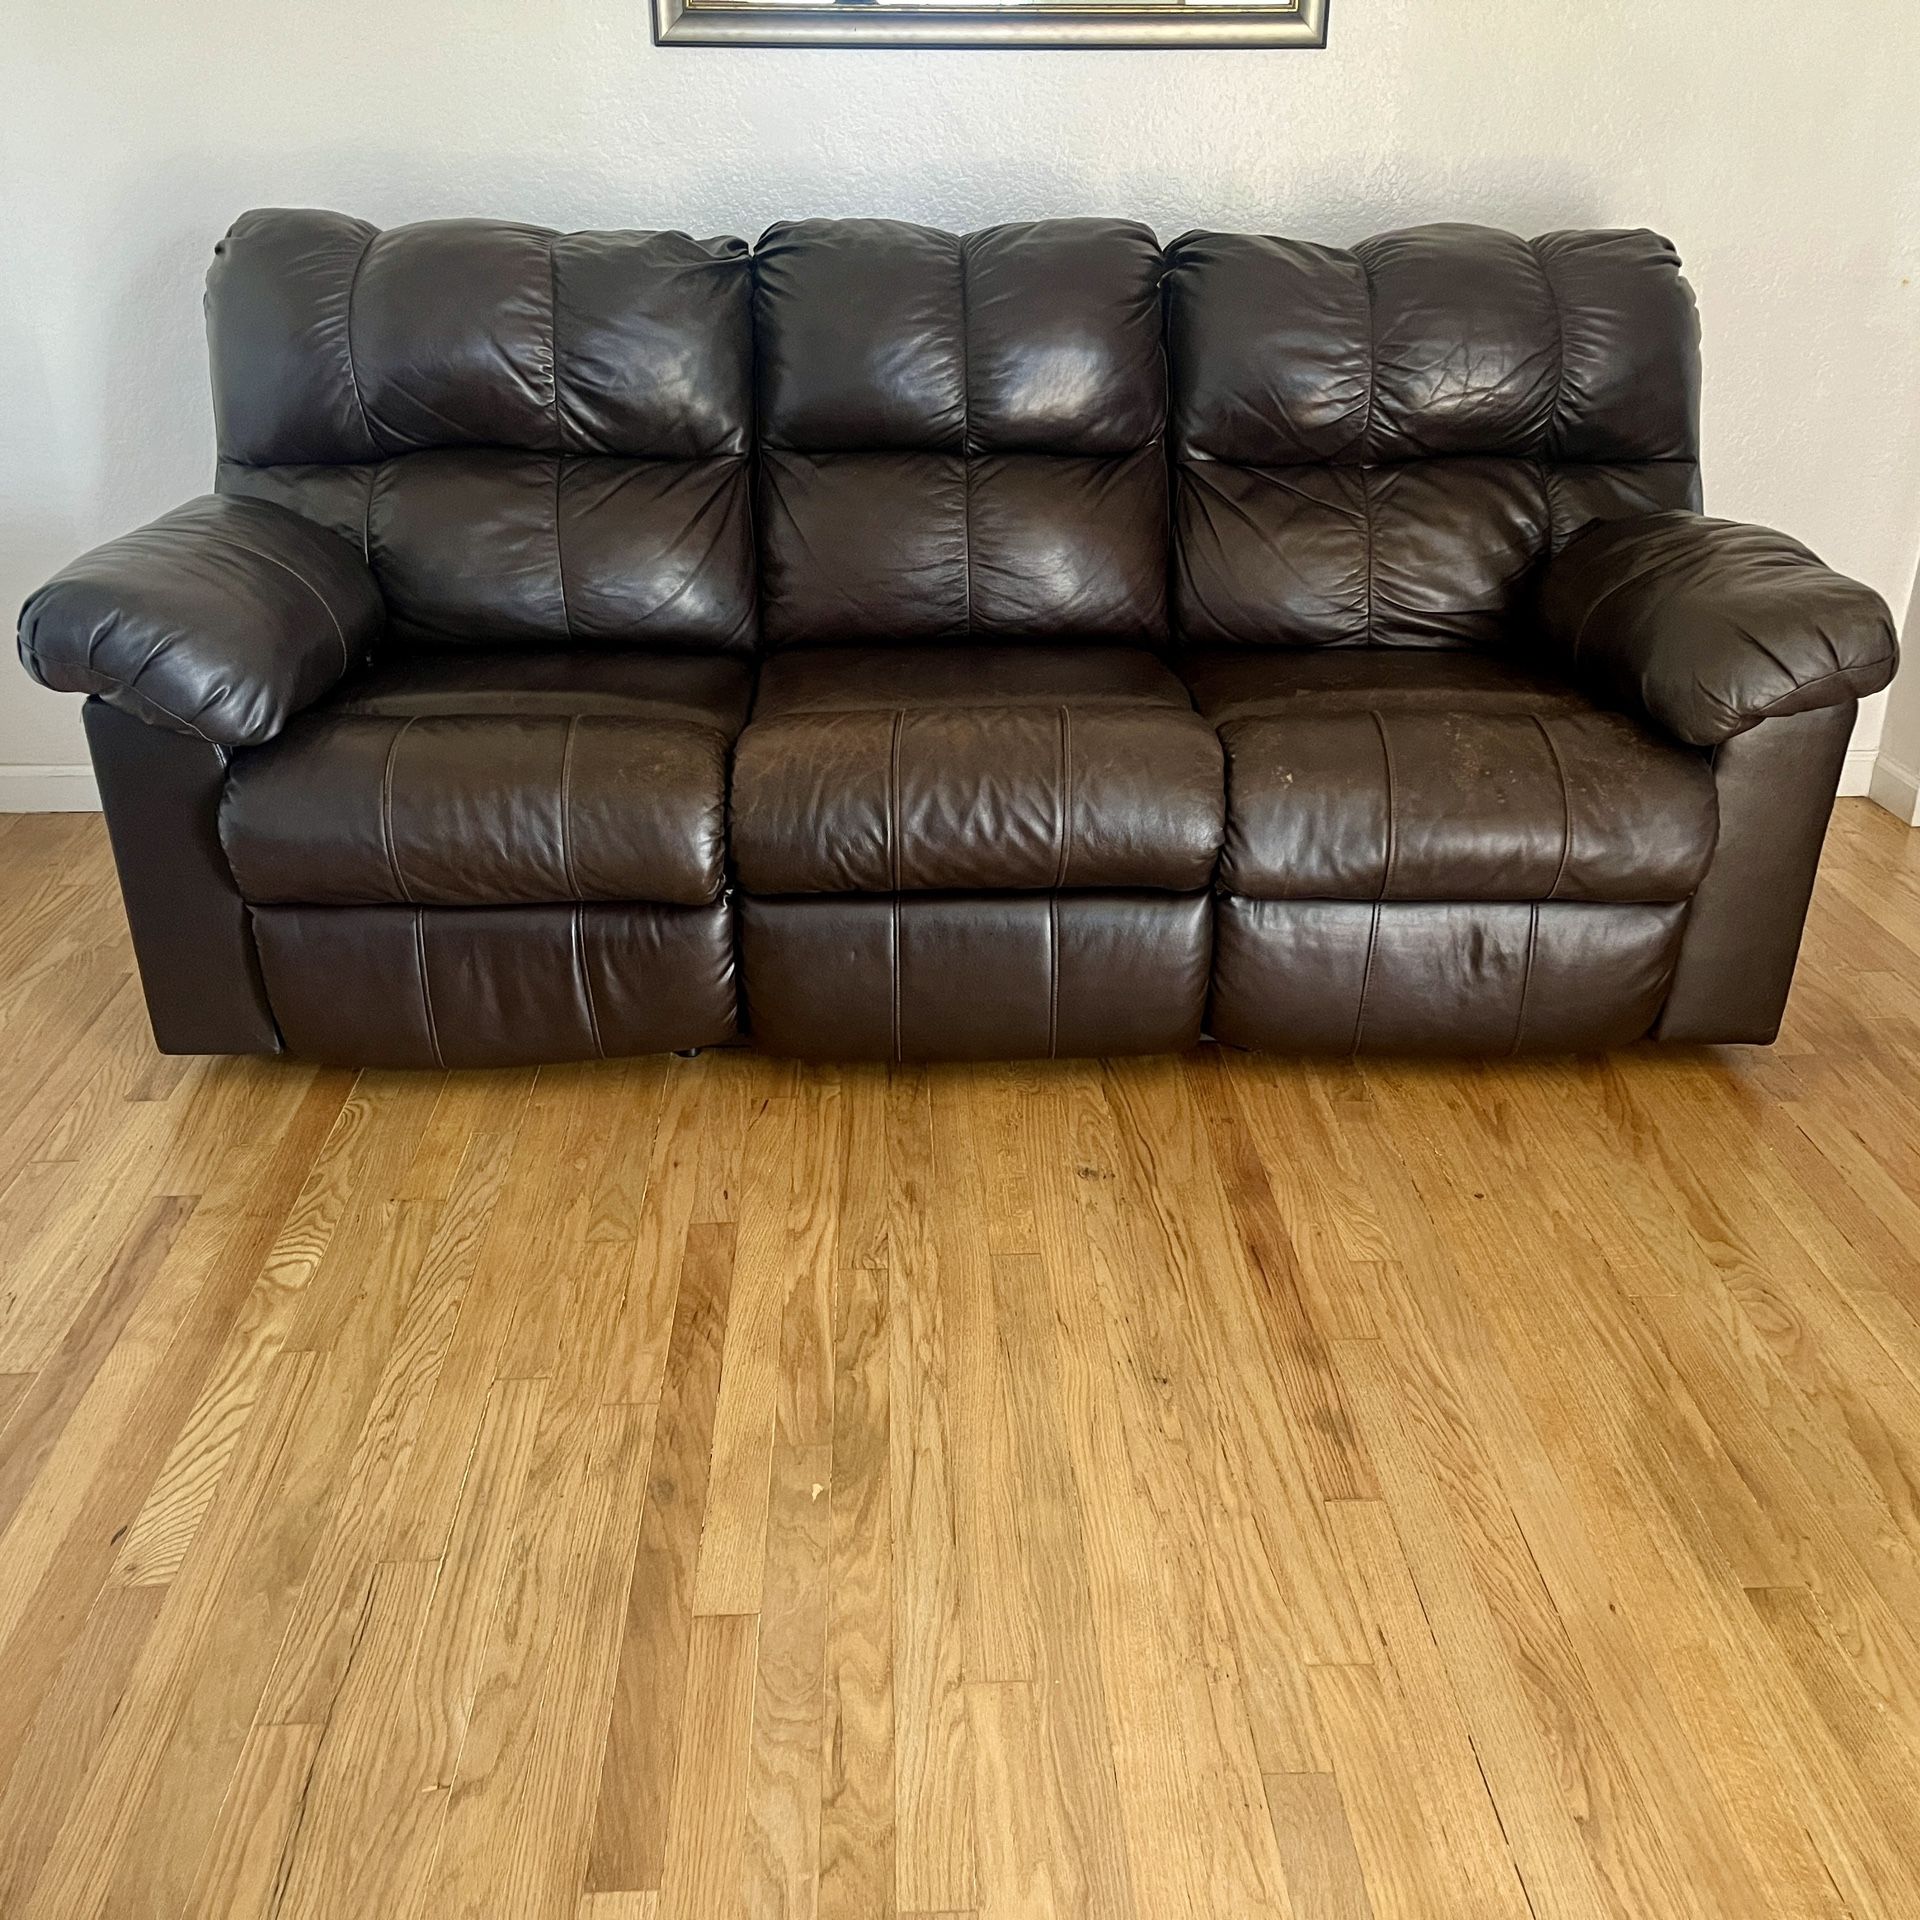 Leather Couch And Loveseat Turns Into Four Recliners